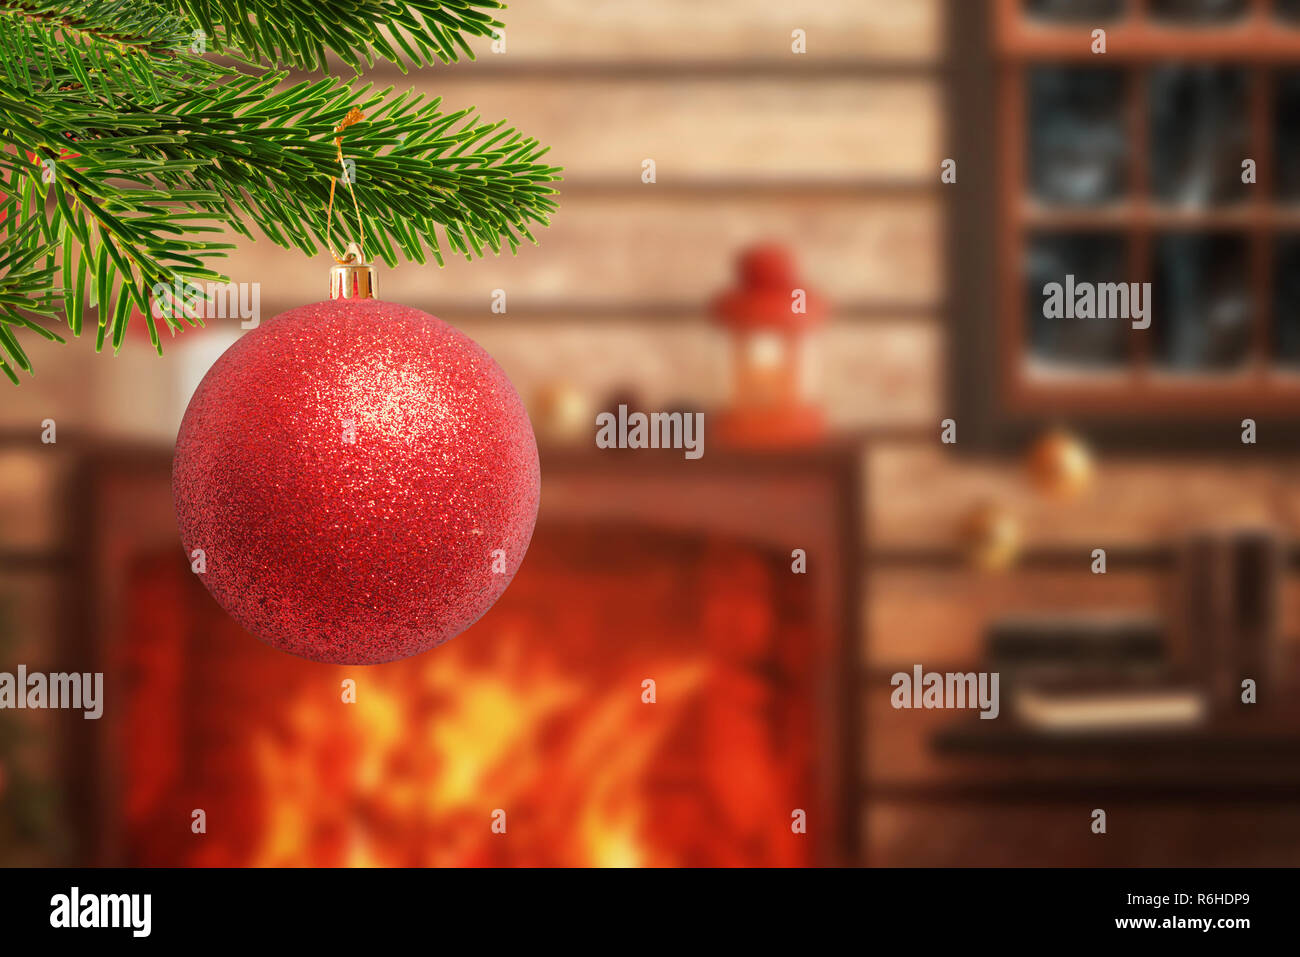 Christmas tree with decorative red ball in the foreground. Fireplace with gifts and Christmas decorations in background. Warm home atmosphere during t Stock Photo